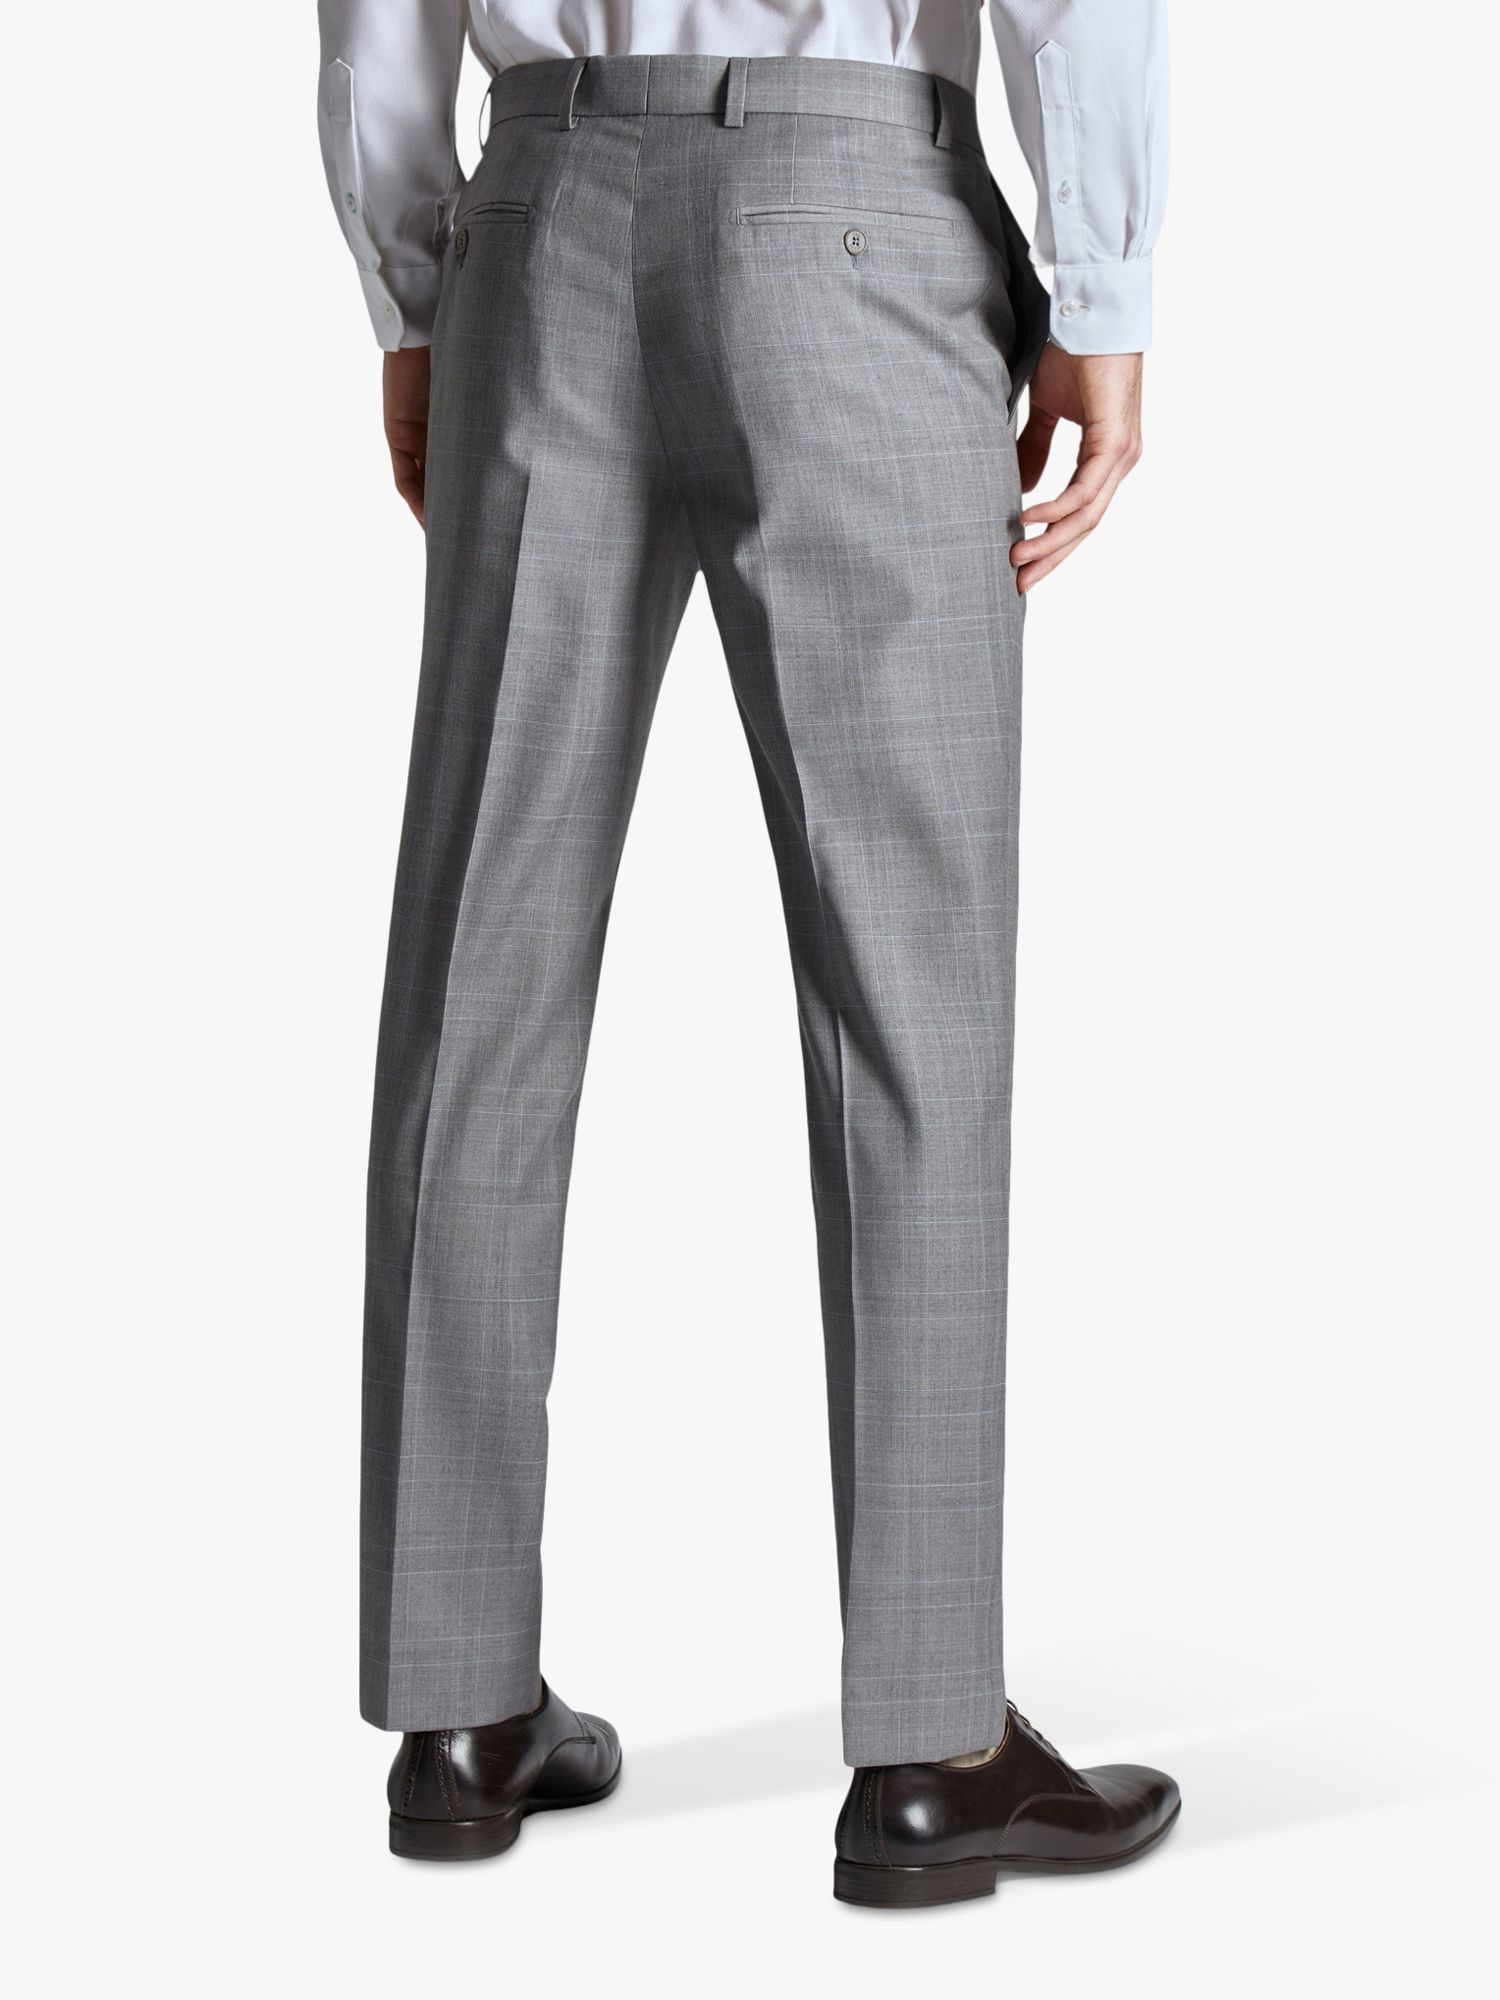 Ted Baker Soft Check Slim Fit Wool Blend Trousers, Grey, 32S